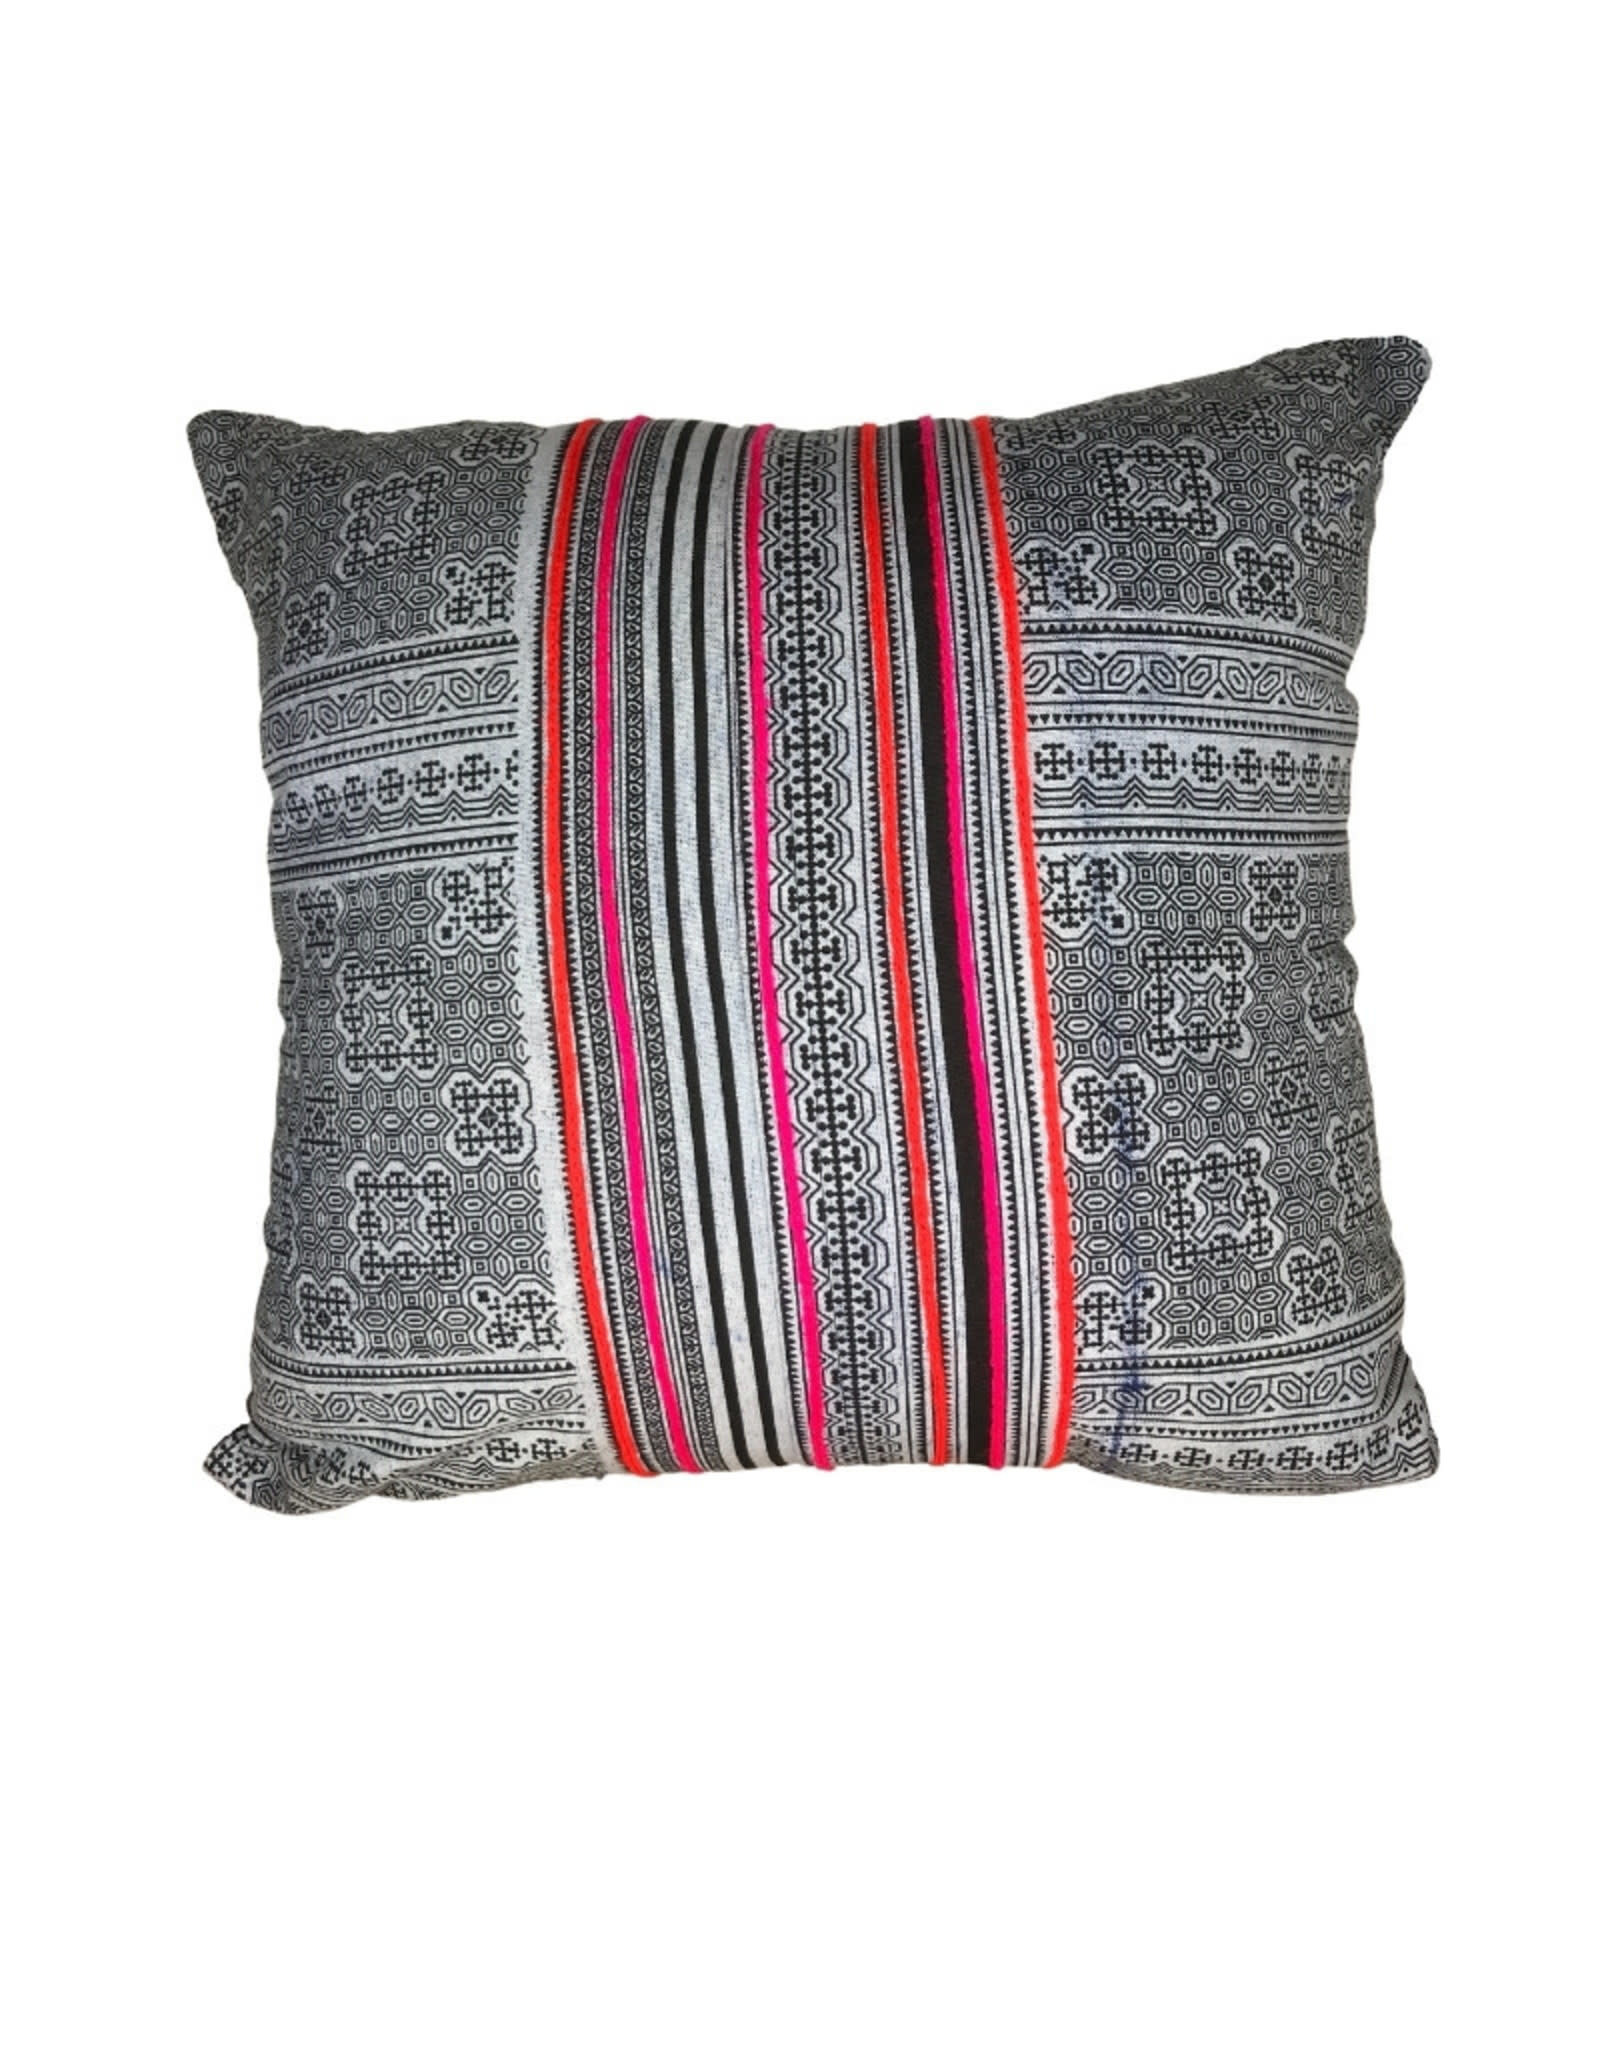 Ten Thousand Villages Canada Black and White Striped Cushion